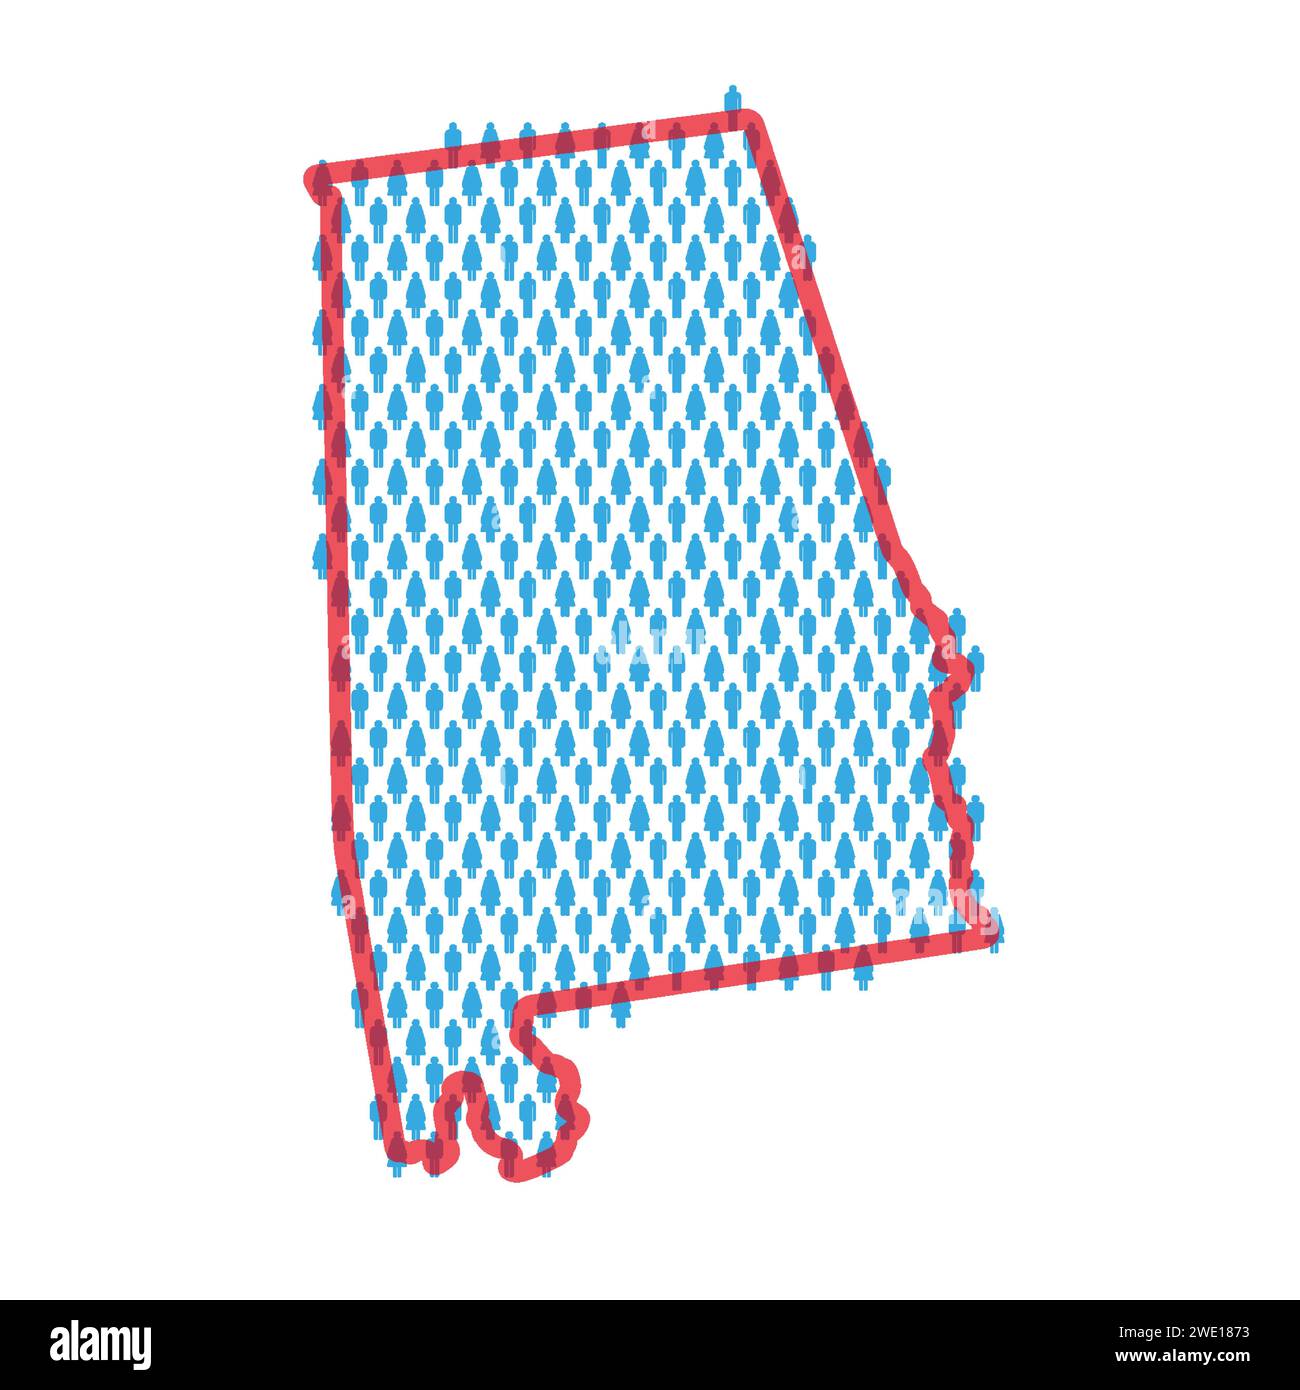 Alabama population map. Stick figures people map with bold red translucent state border. Pattern of men and women icons. Isolated vector illustration. Stock Vector